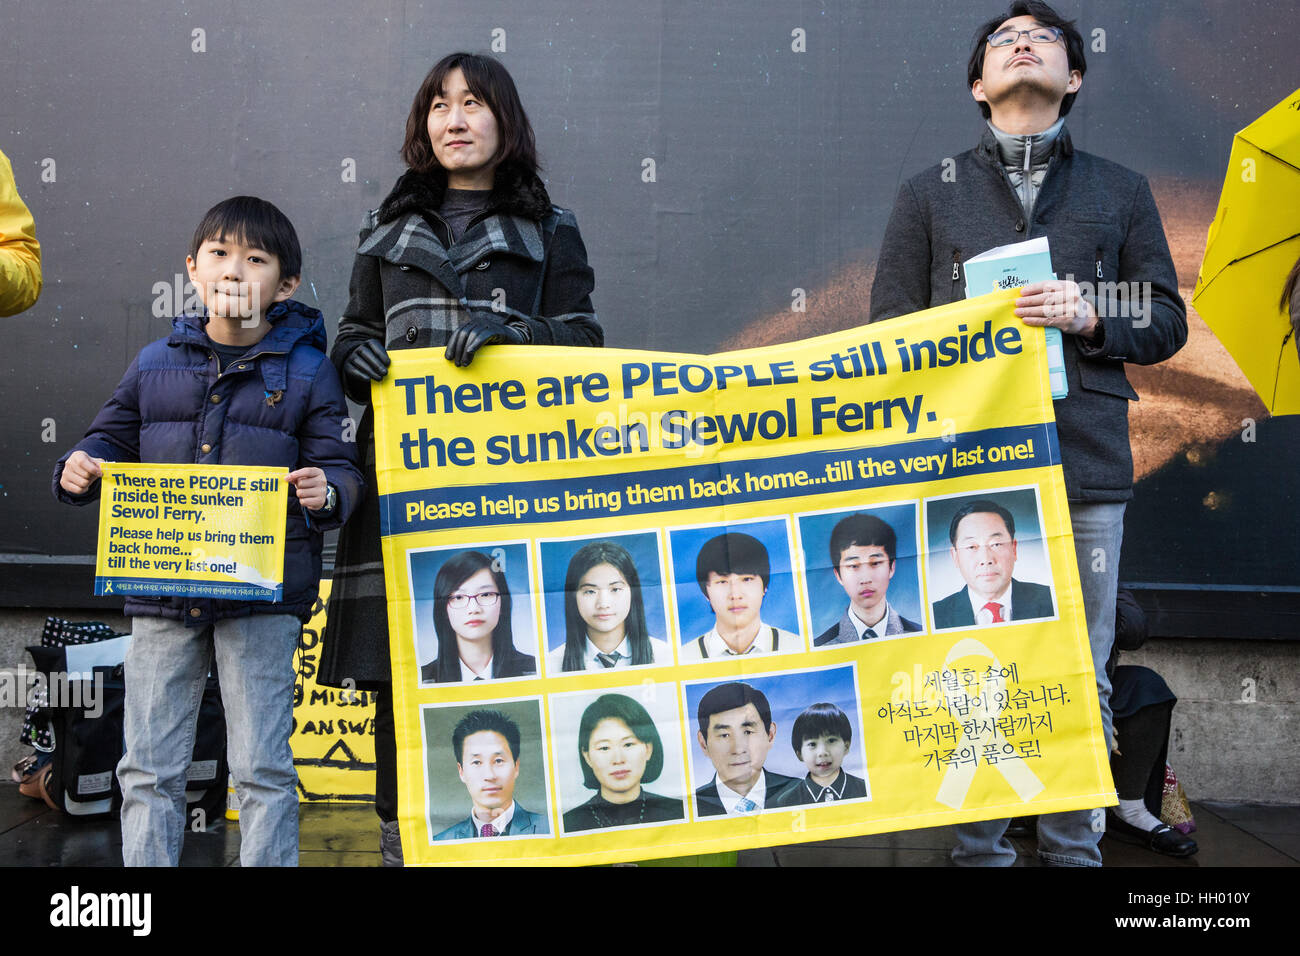 London, UK. 14th January, 2017. Members of the UK's Korean community hold a silent protest in Trafalgar Square to mark 1,000 days since the Sewol ferry disaster, to remember the victims and to demand that the Korean government not only raises the ferry without dismantling it to enable a thorough inquiry and recovery of all missing victims but also punishes those responsible and enacts anti-disaster regulations in London, UK. Credit: Mark Kerrison/Alamy Live News Stock Photo